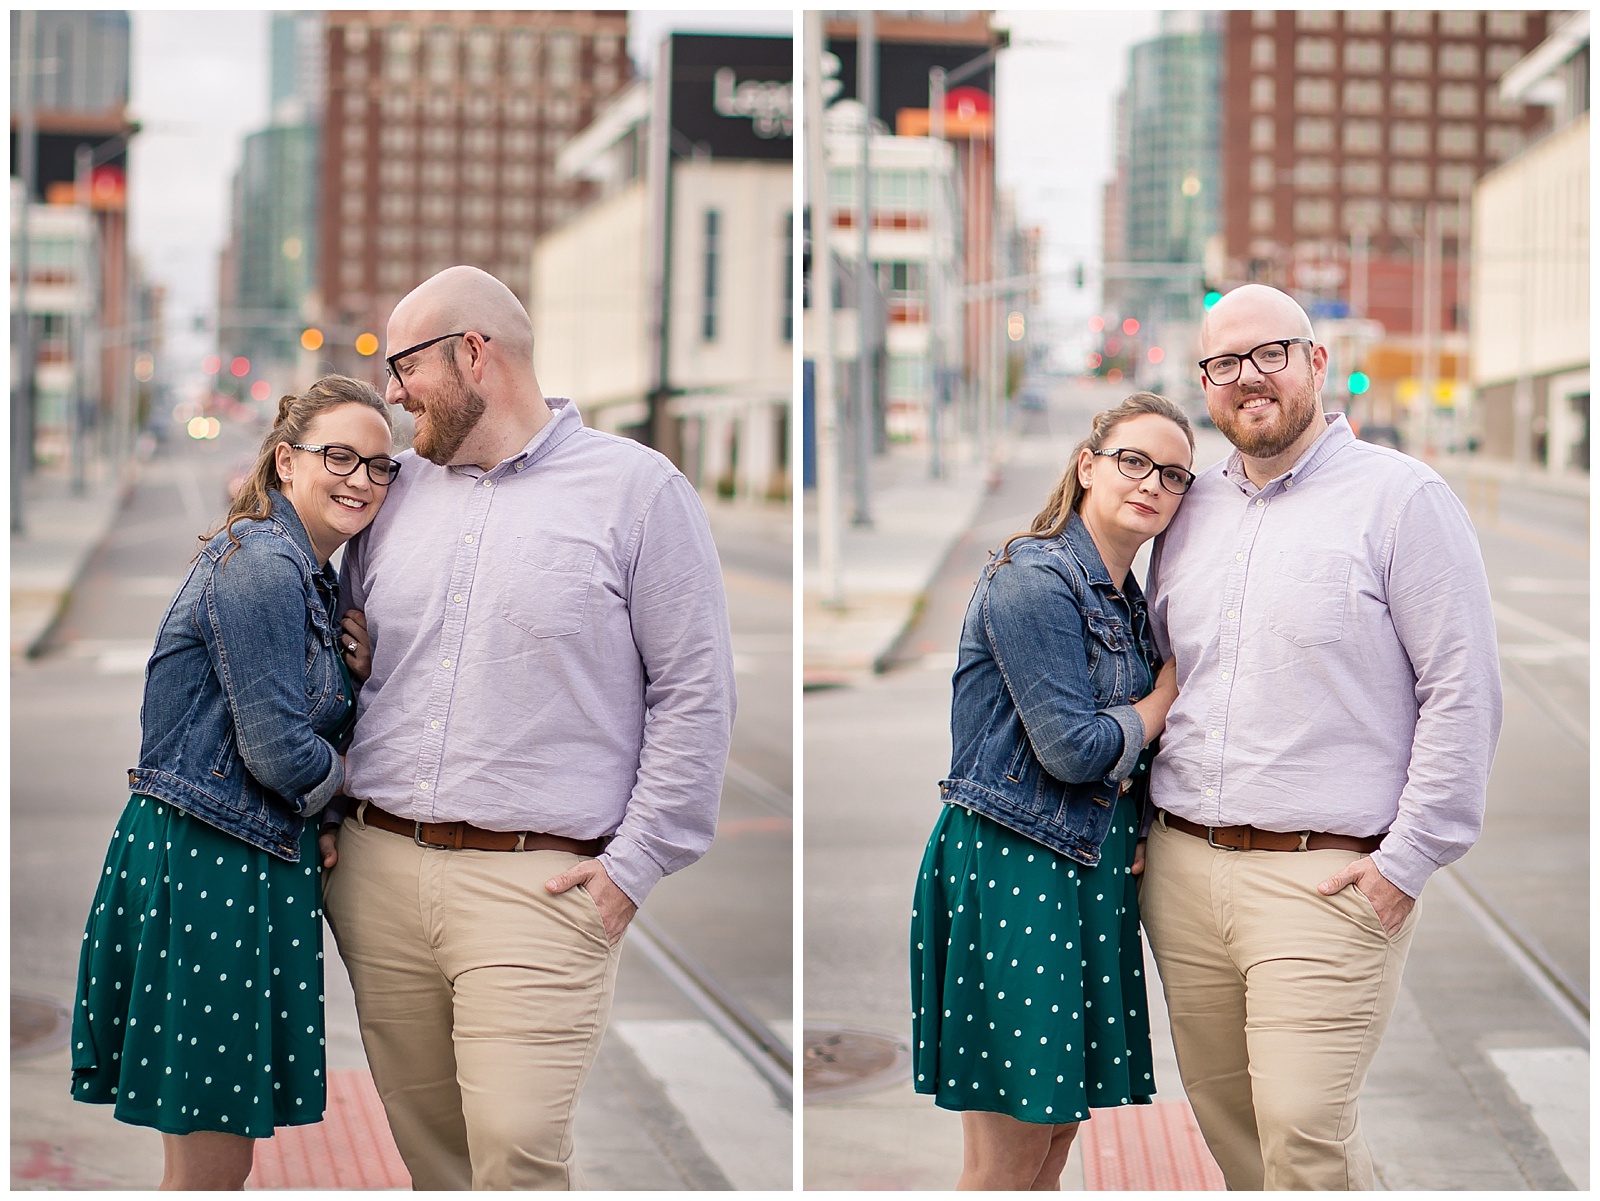 An engagement session in the Crossroads Arts District in Kansas City.